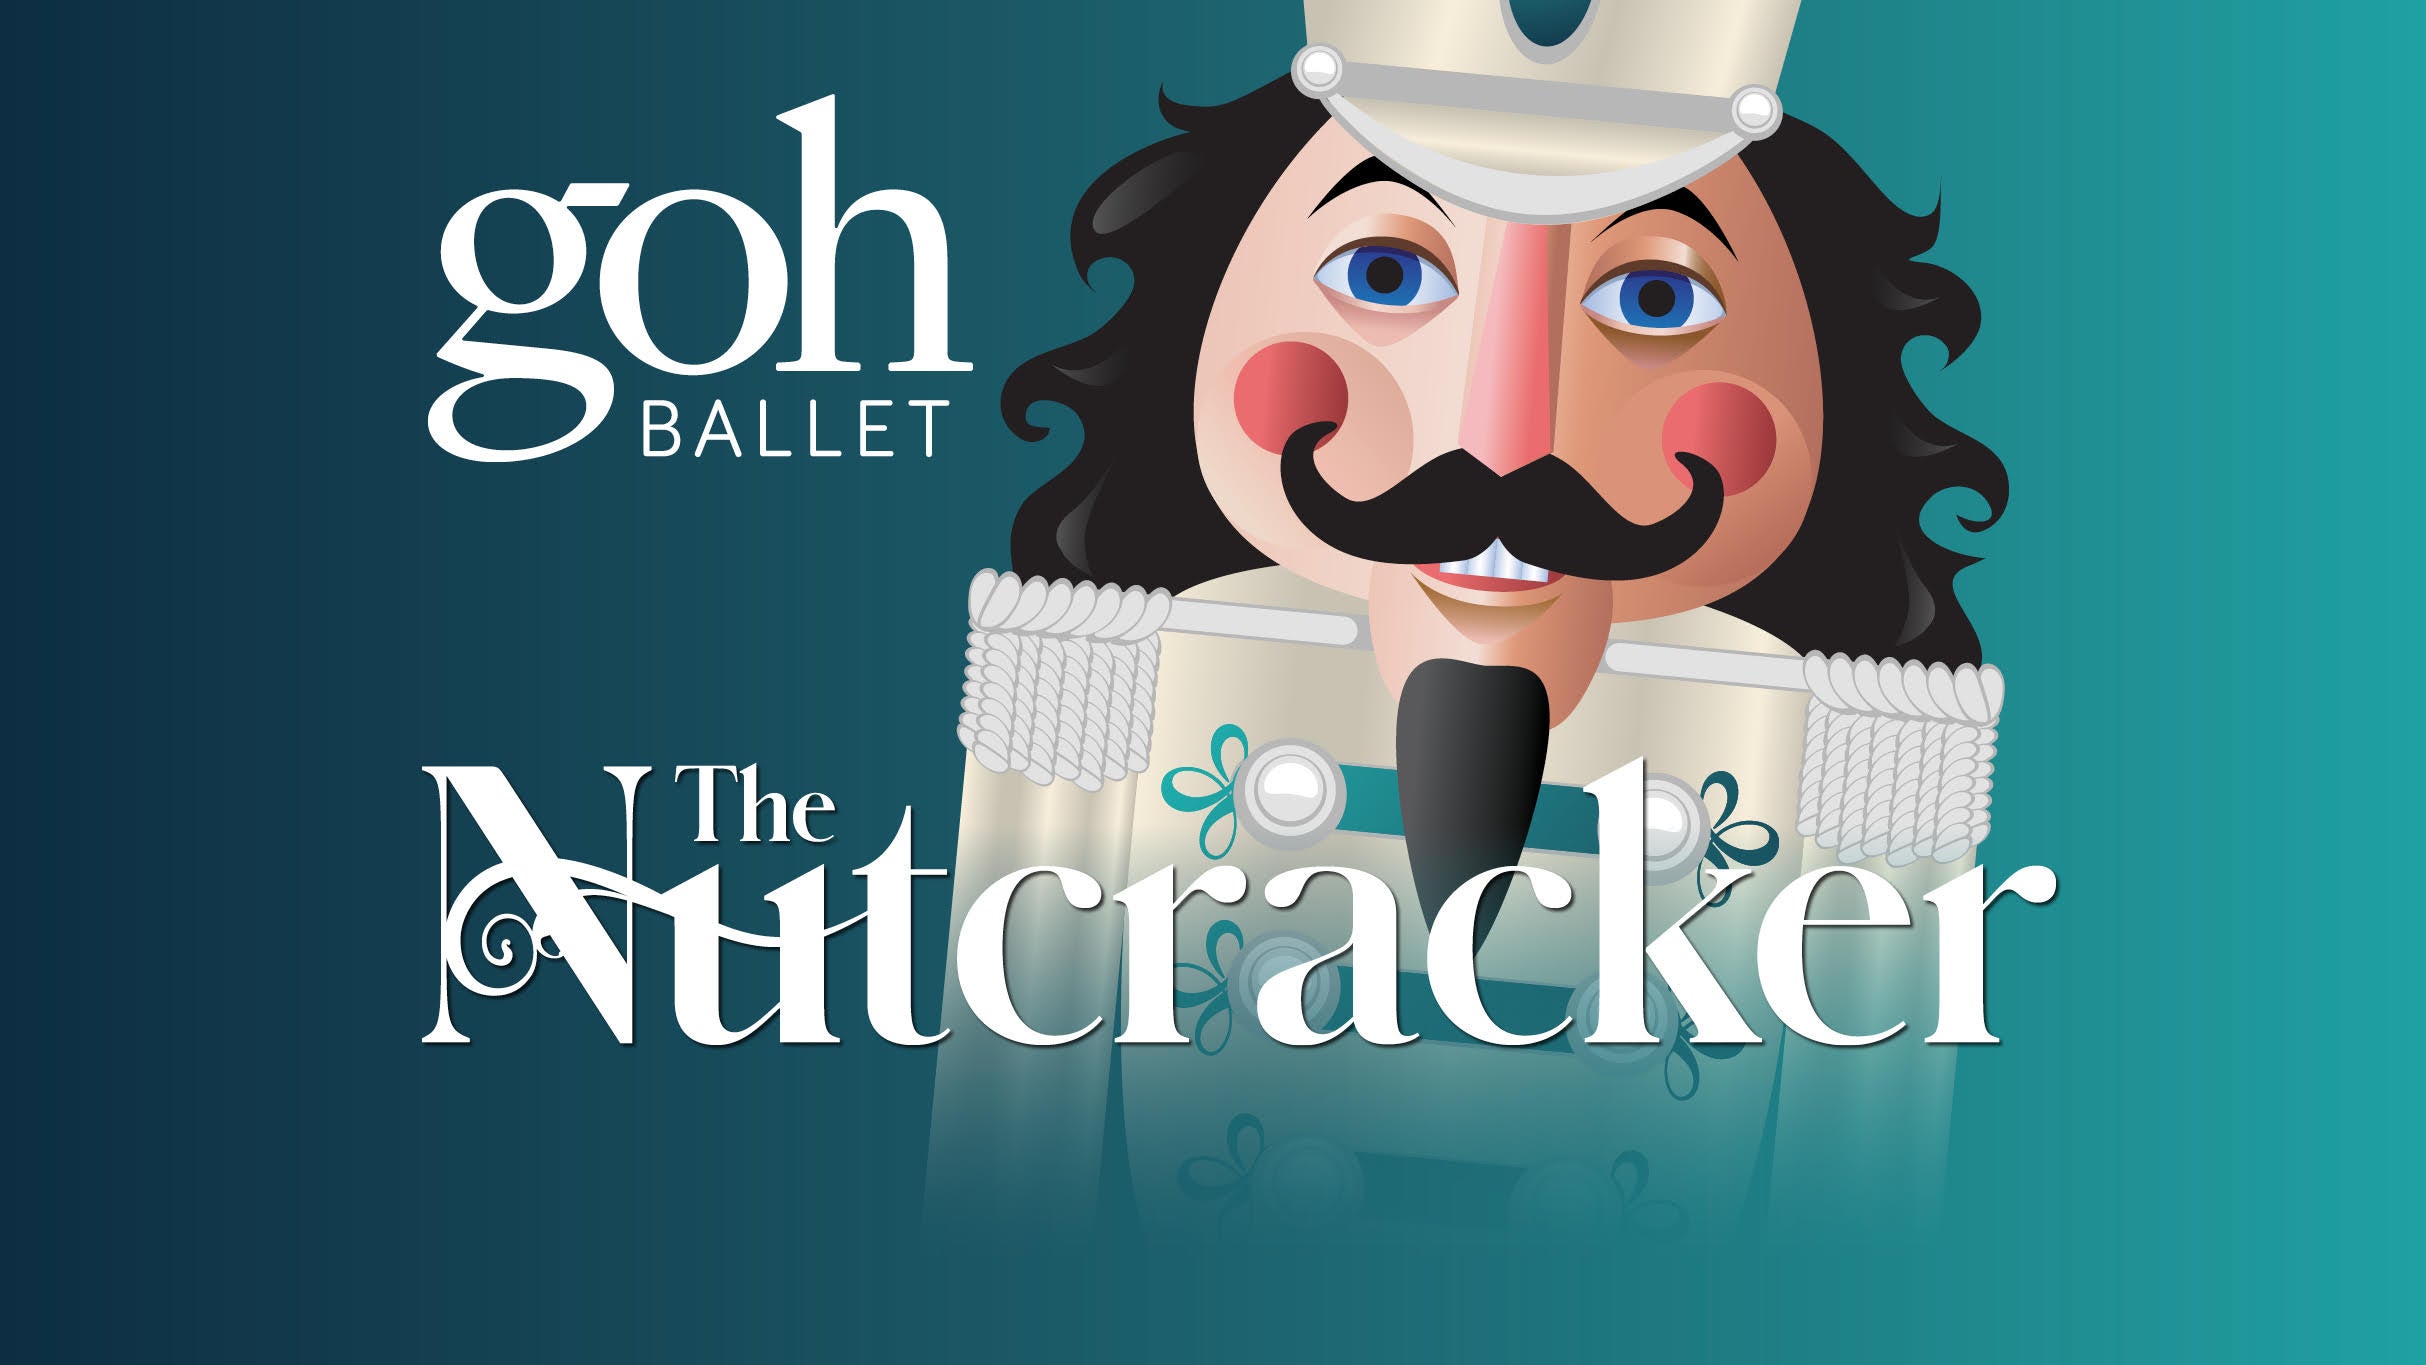 Goh Ballet's The Nutcracker Presented by RBC in Vancouver promo photo for 20% Off  presale offer code